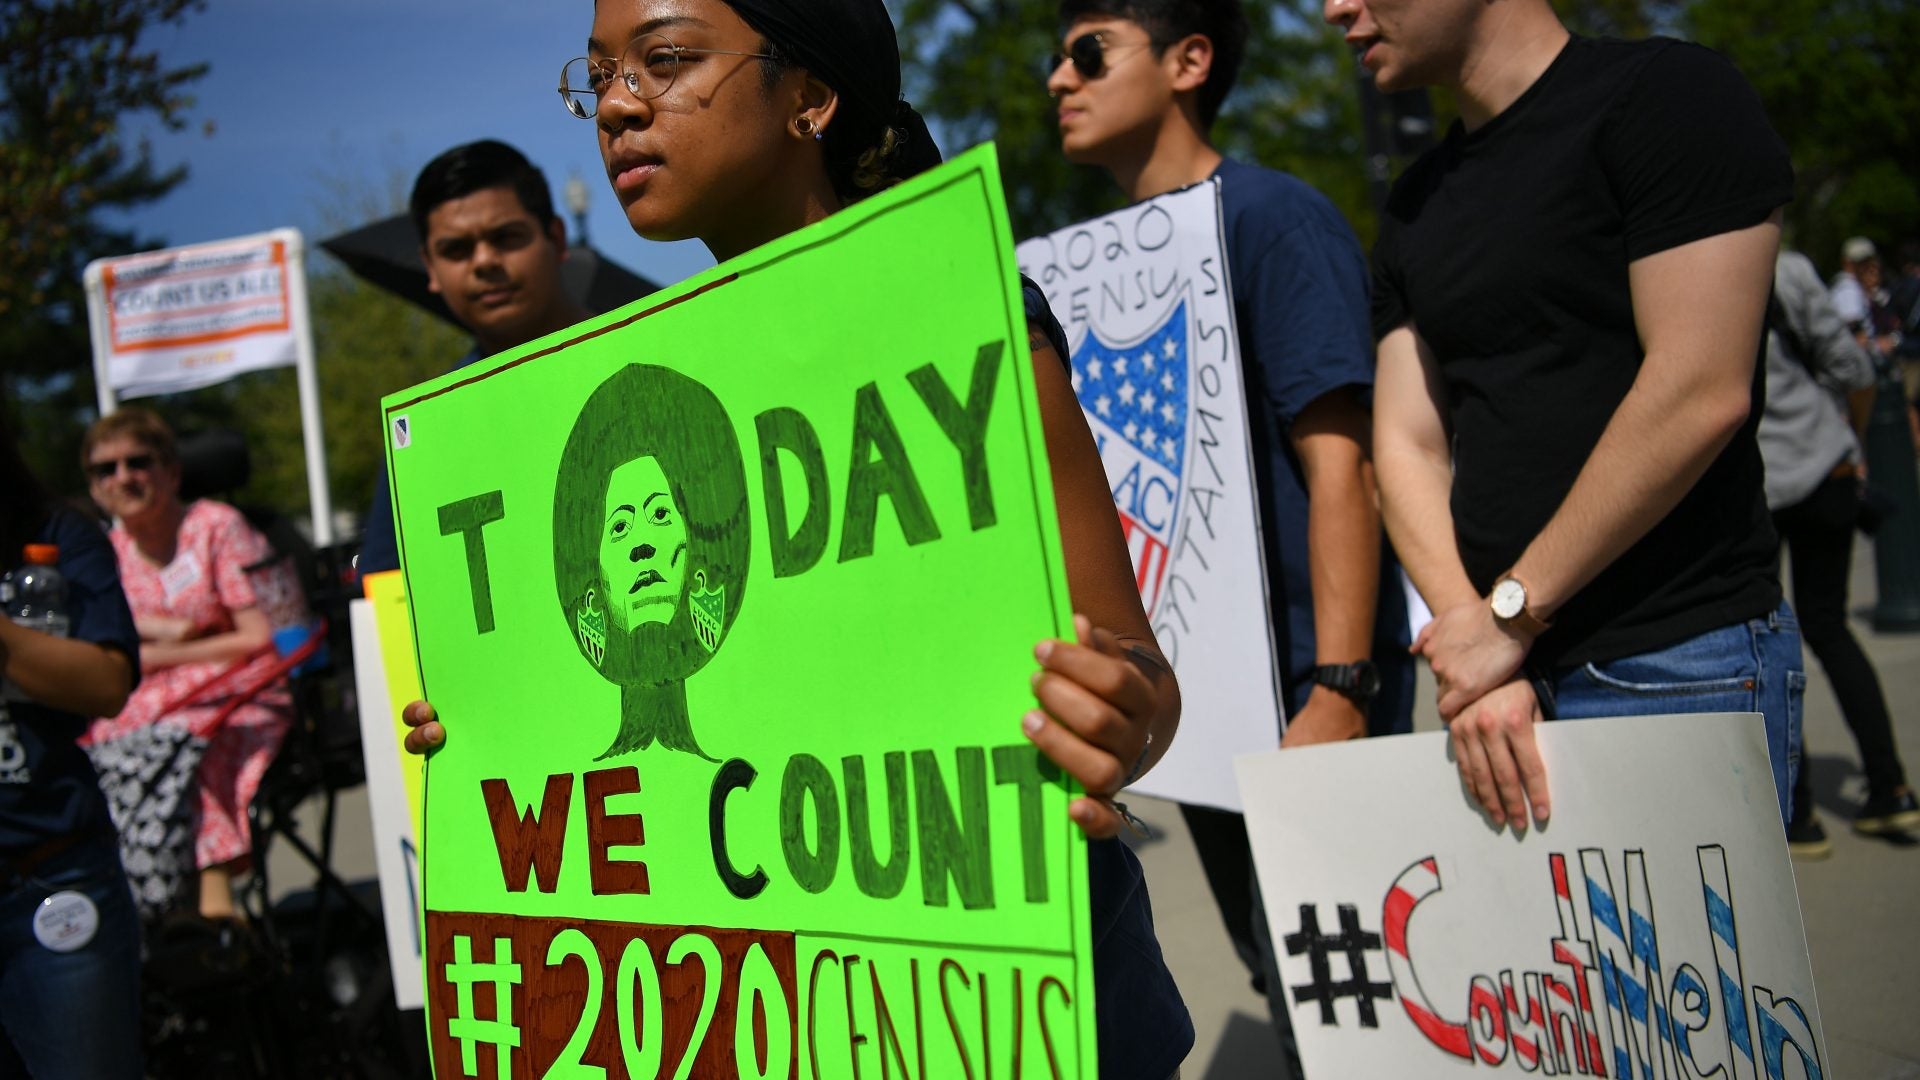 Are You Counted? What The 2020 Census Means For Communities Of Color